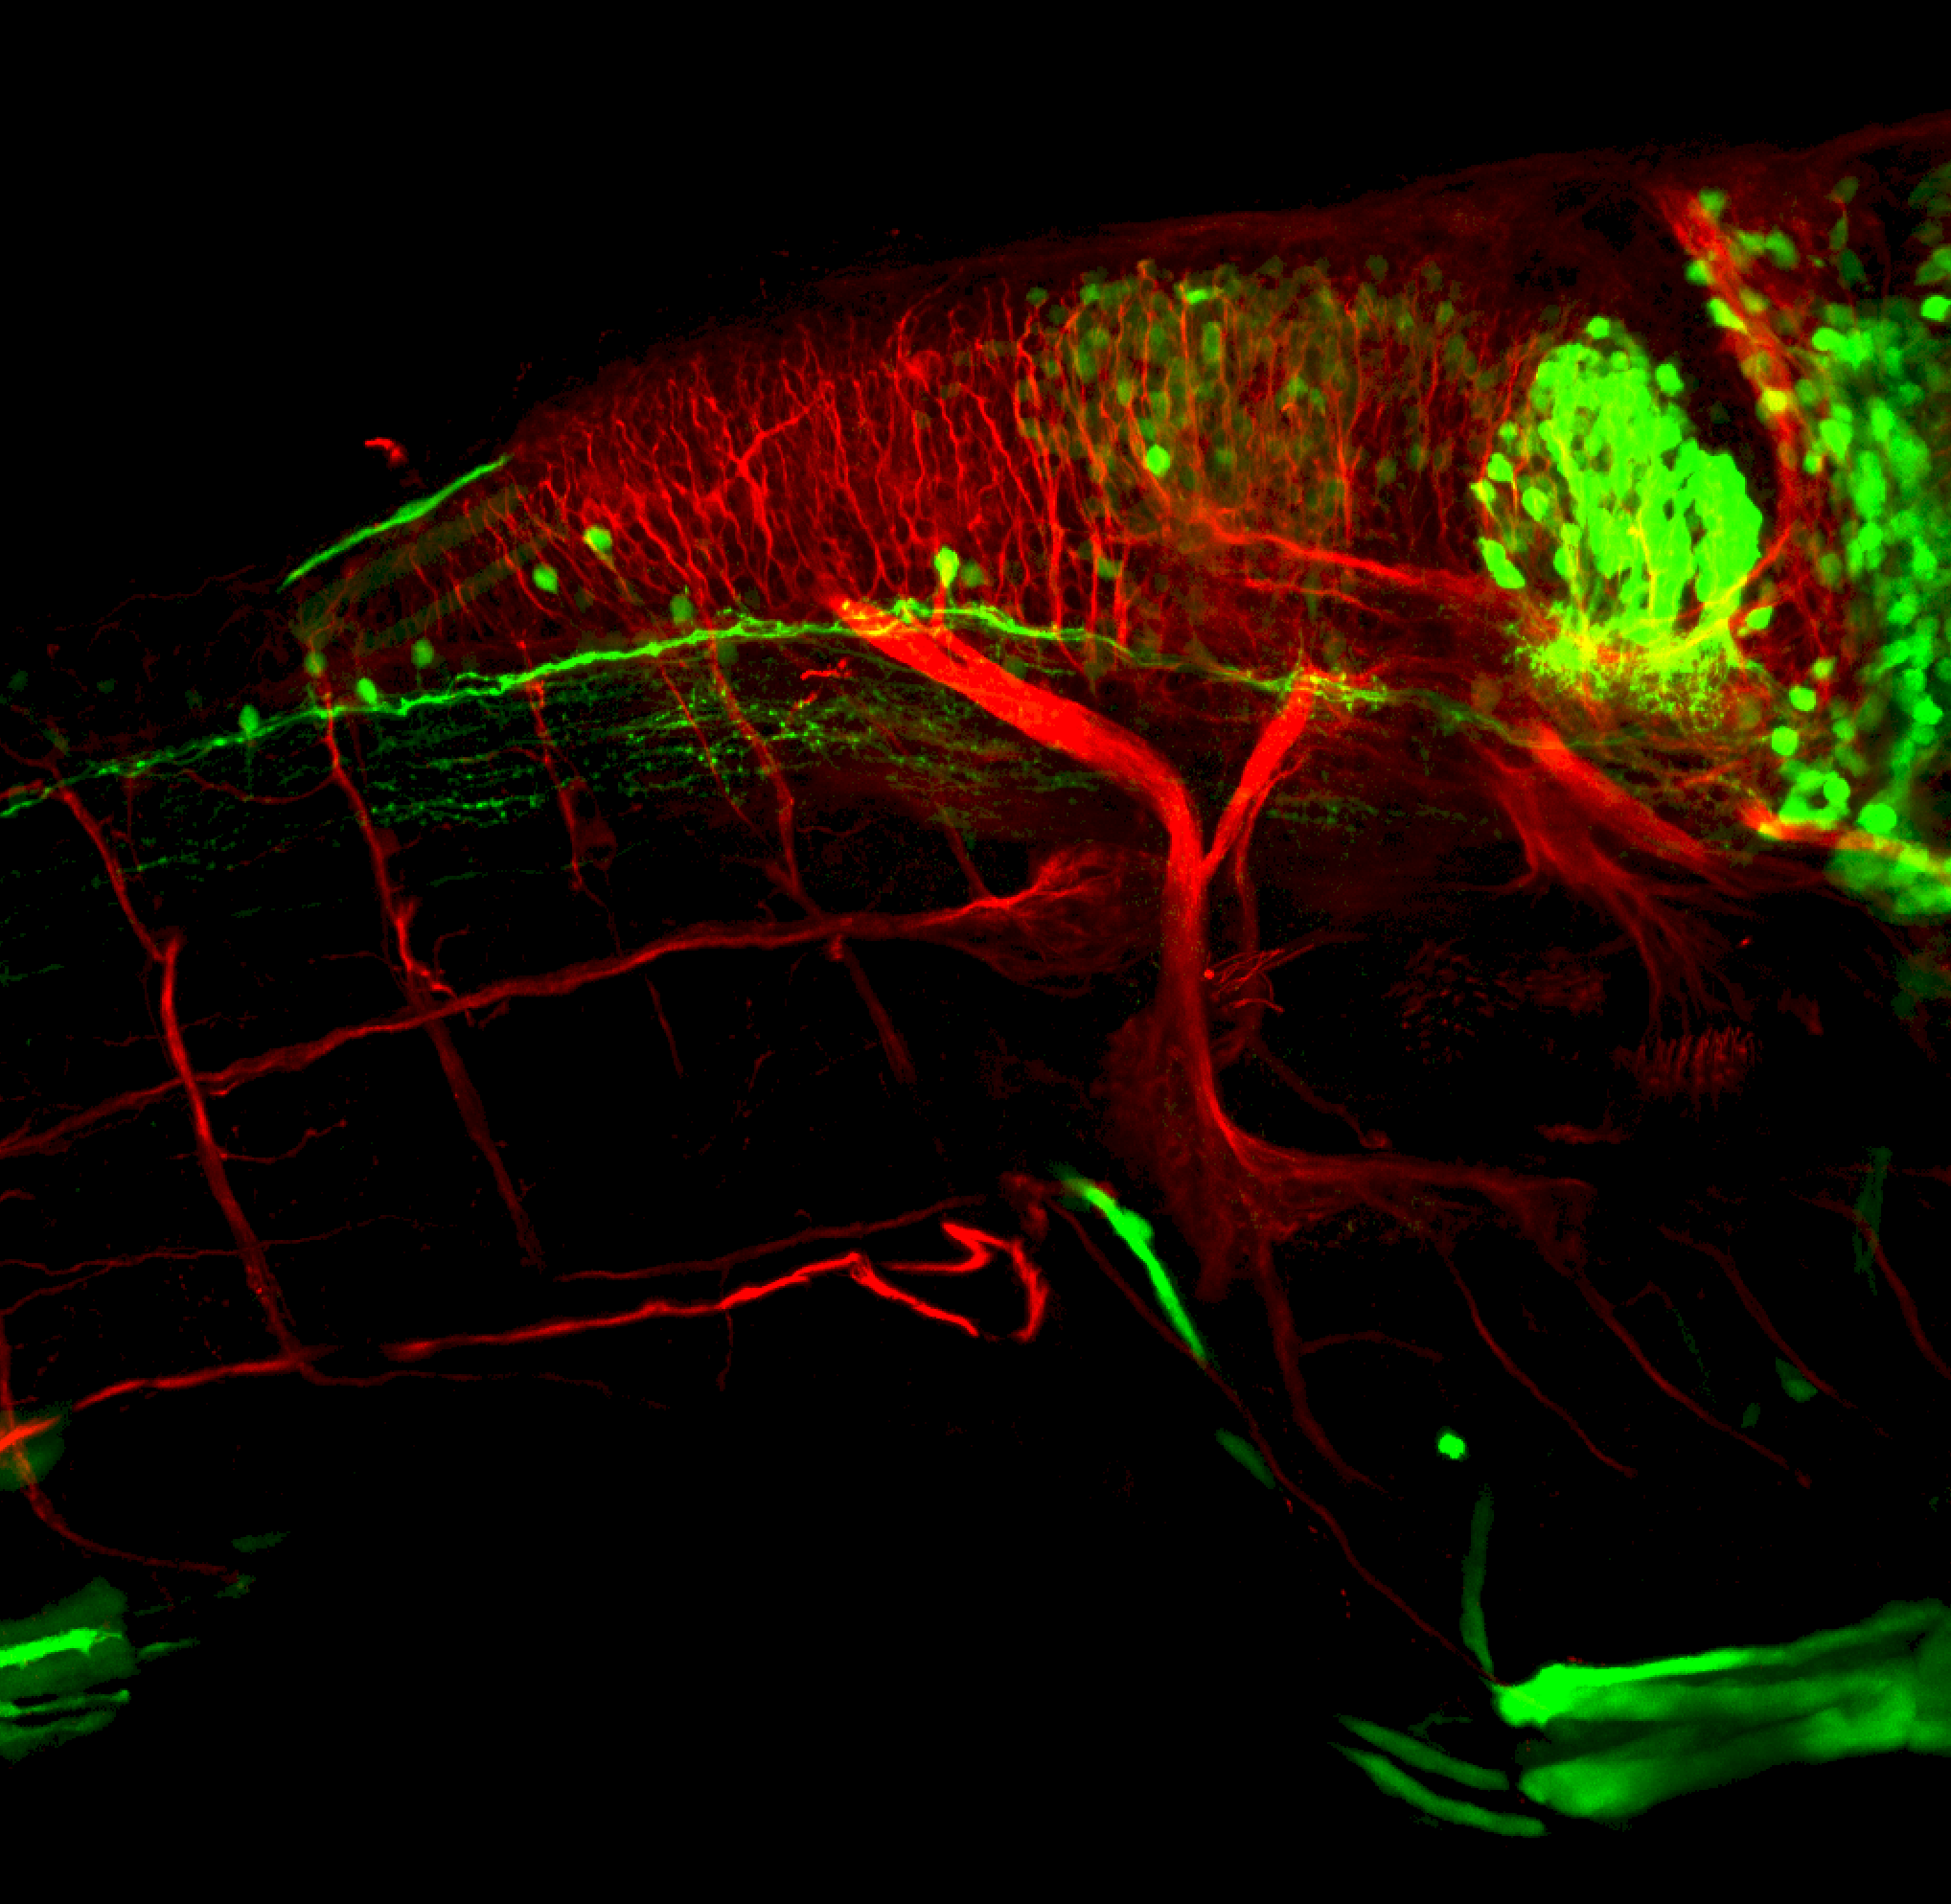 3dpf late view of dlx:GFP hindbrain